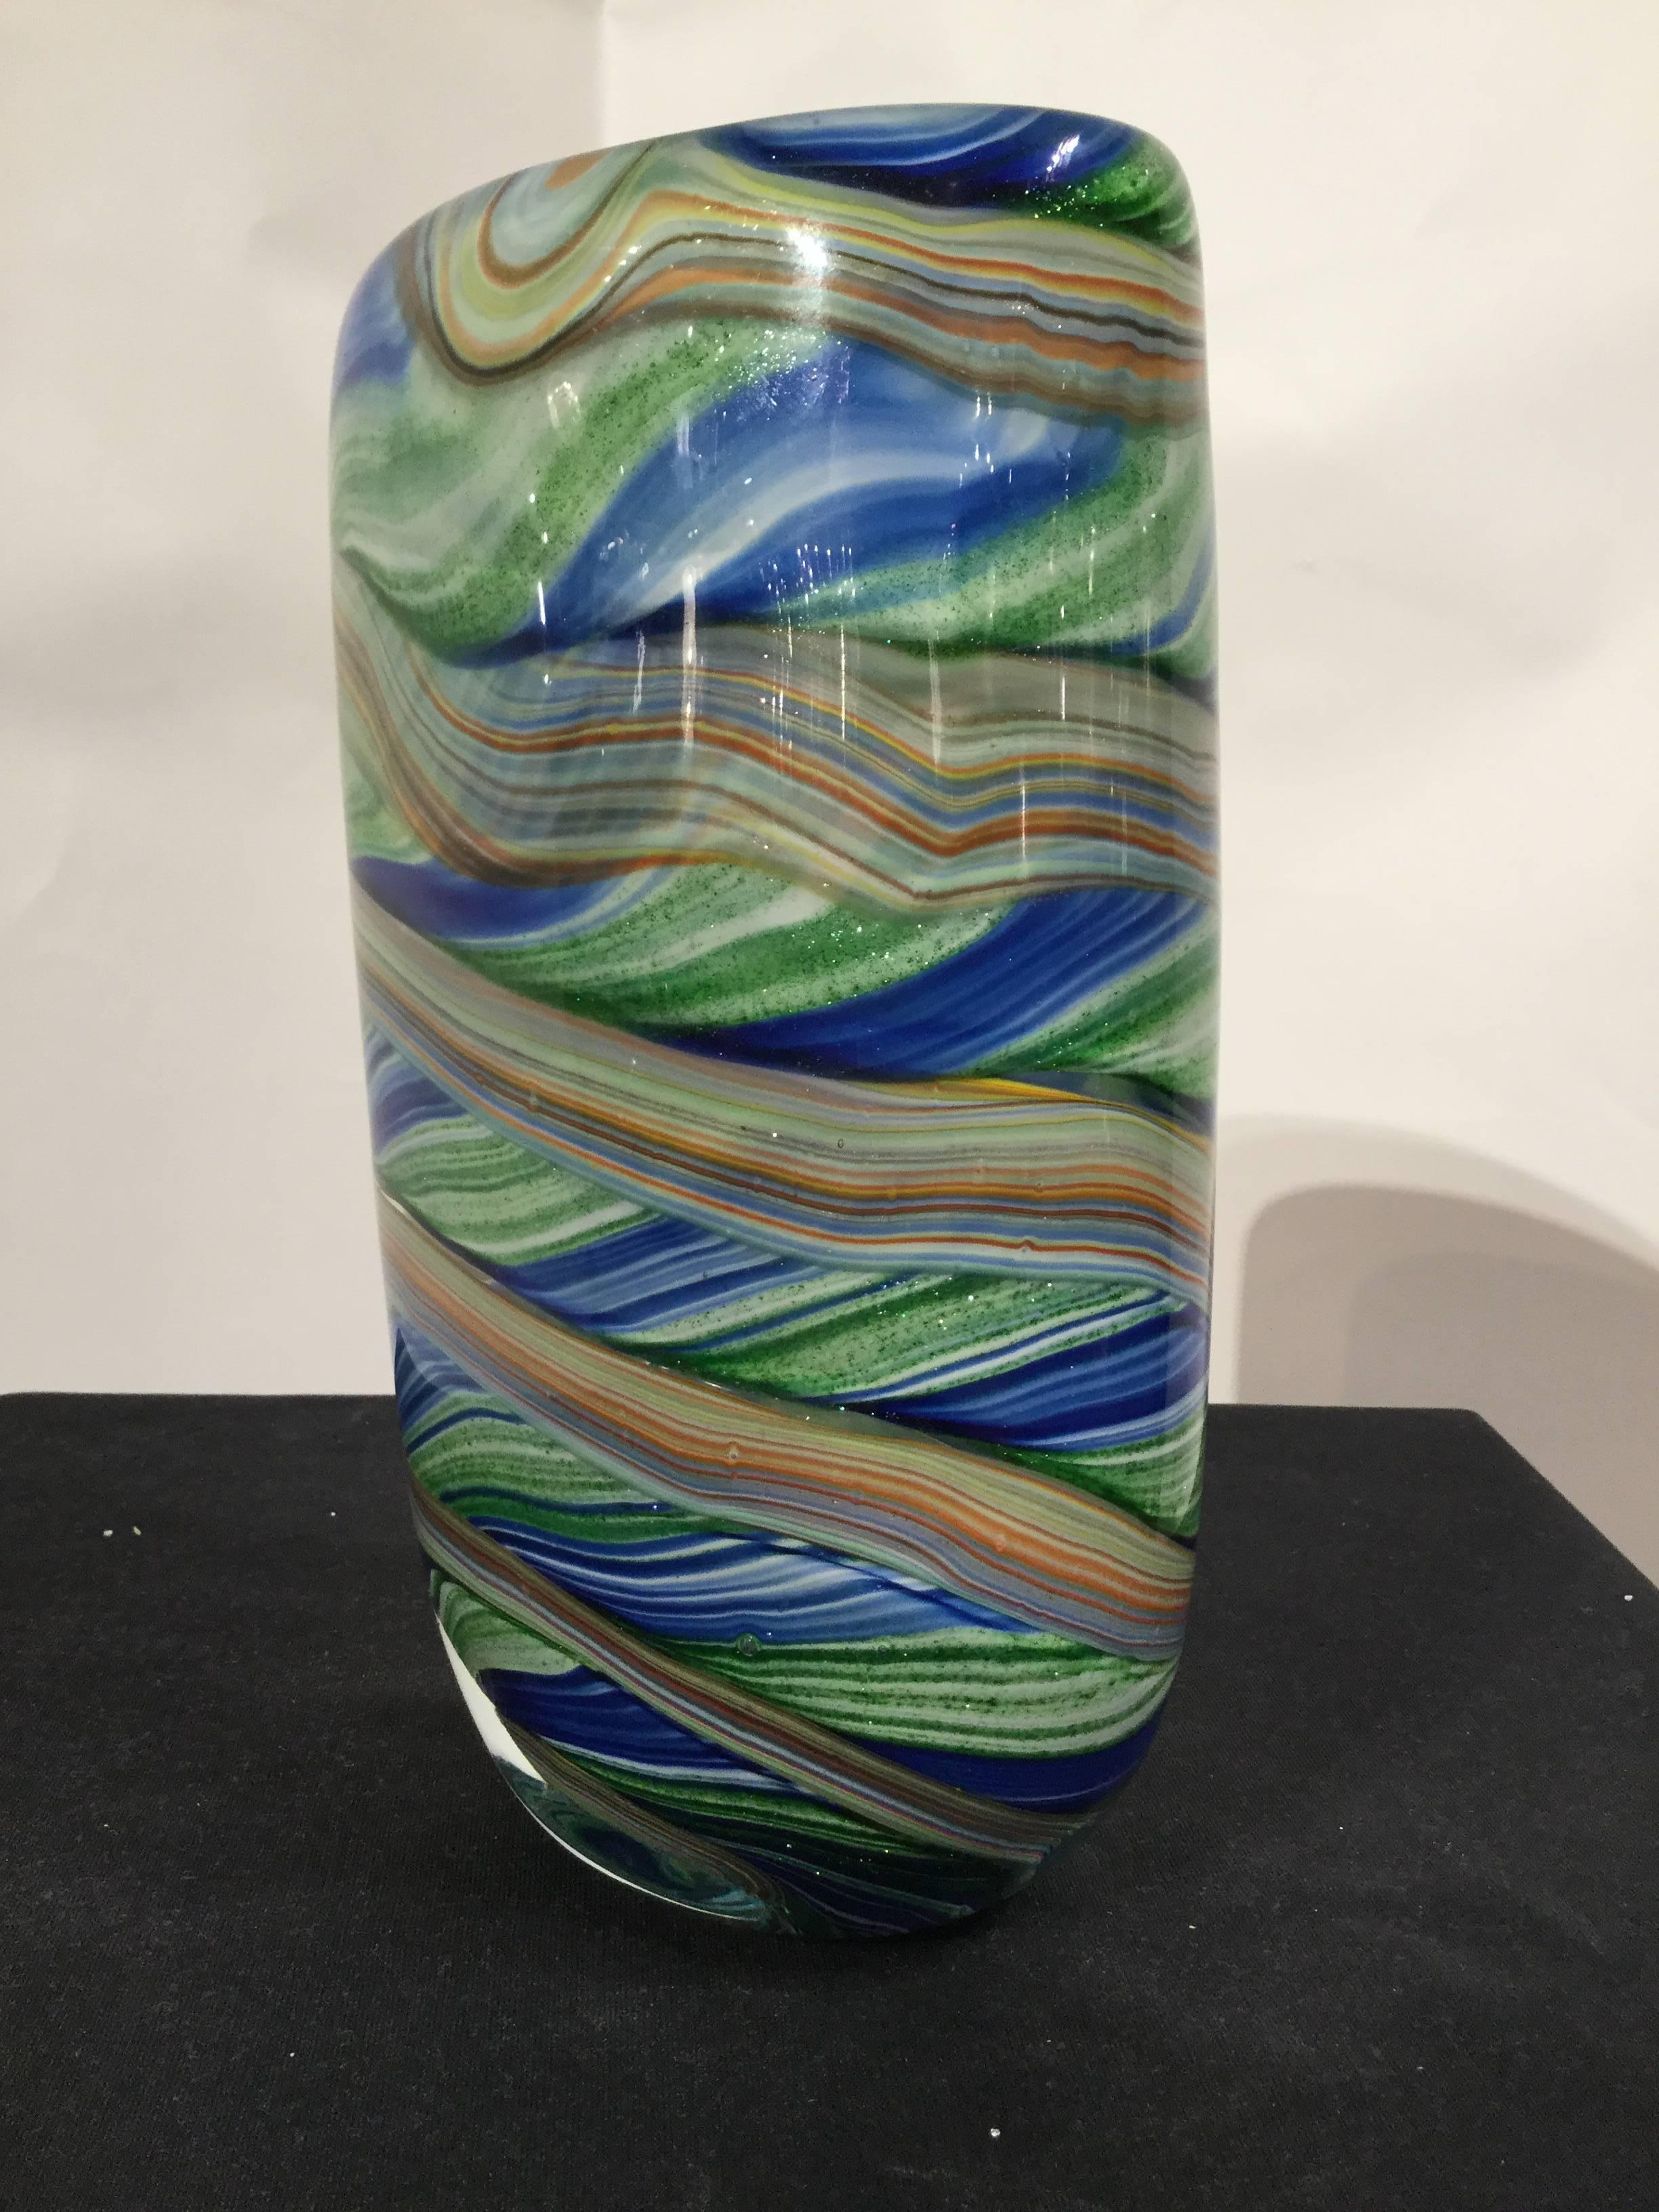 A multicolor Venetian glass vase depicted in post-impressionist style with yellow, brown, green, blue and orange stripes.
 